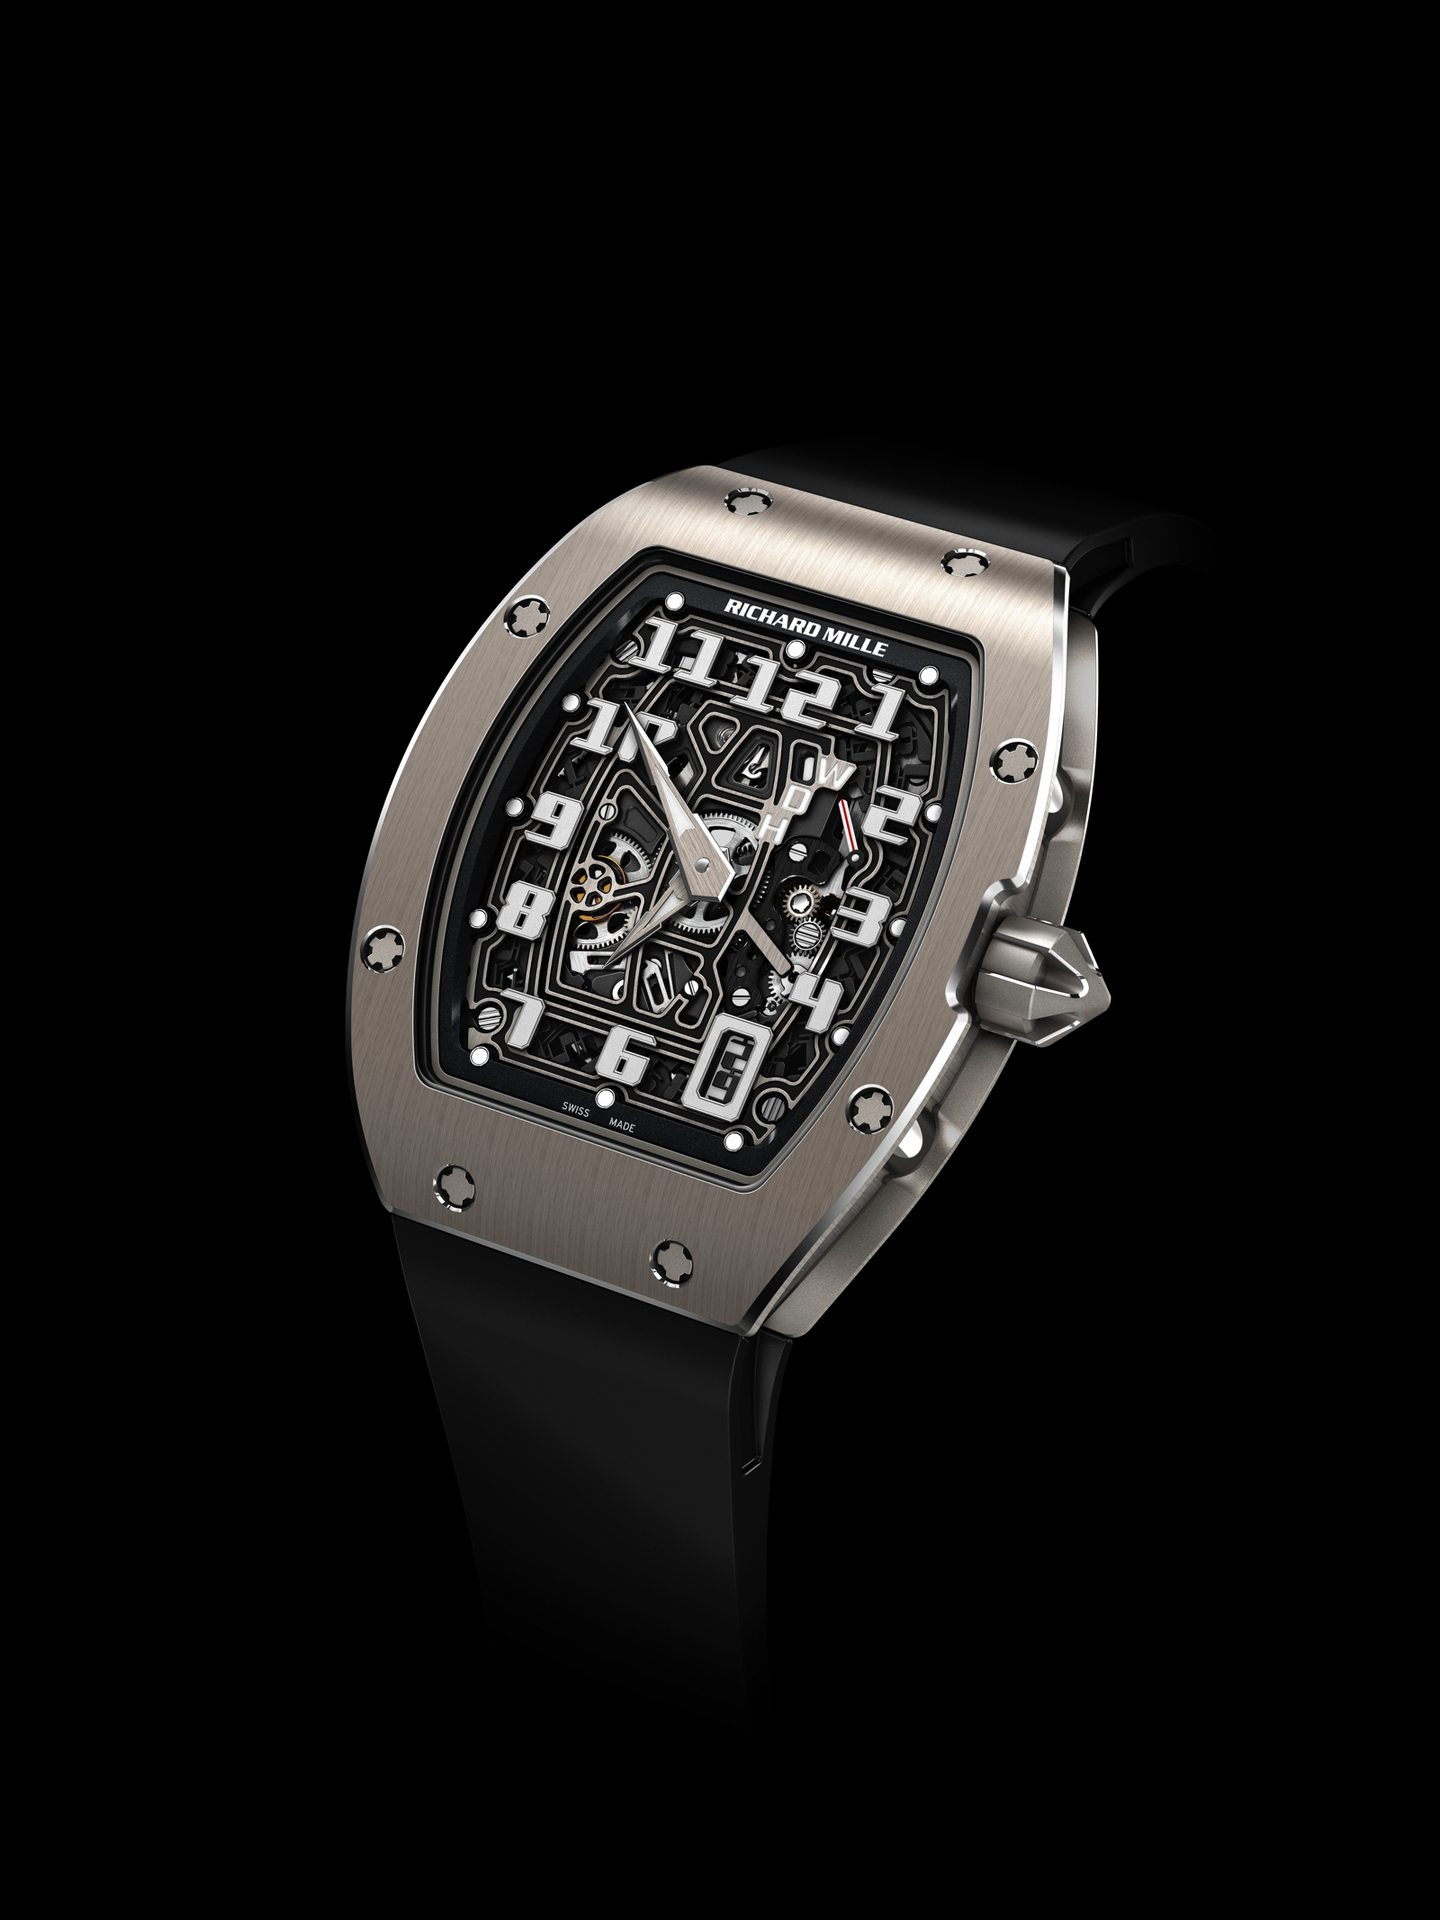 SIHH Preview: Richard Mille RM 67-01 Automatic Extra Flat